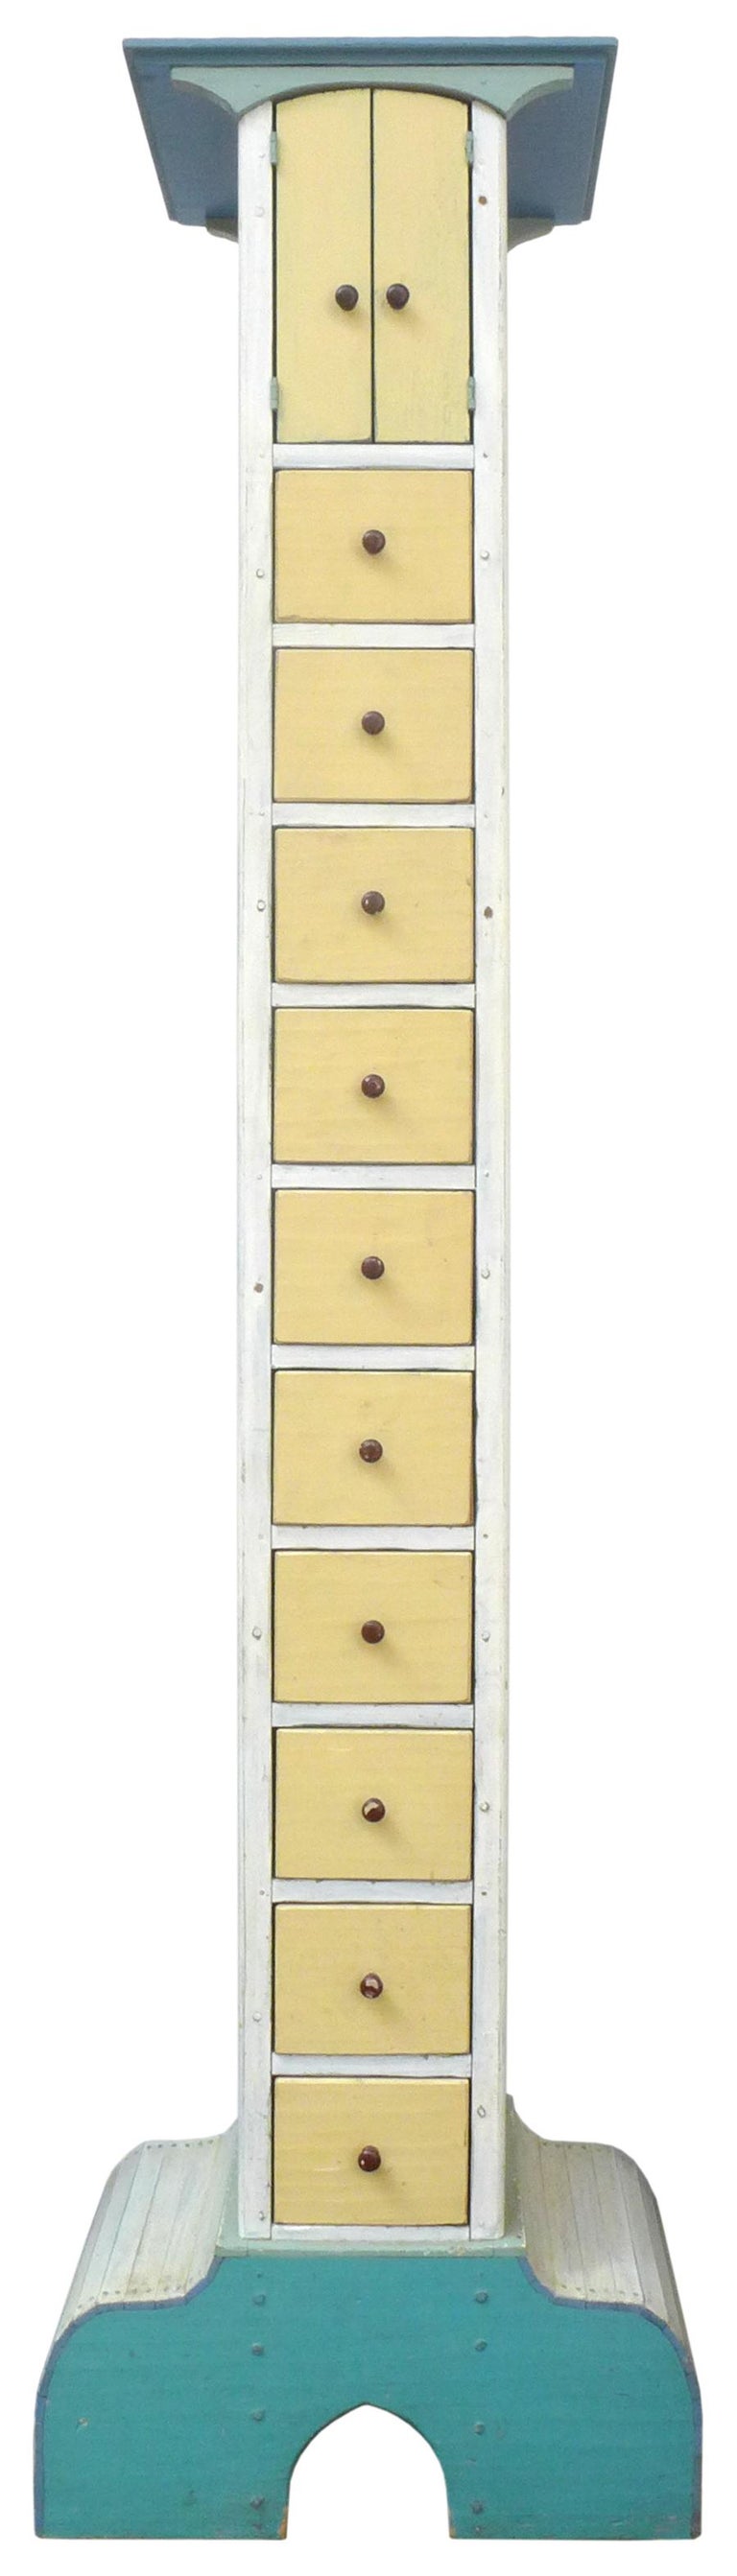 An unusual, Post-Modern chest of drawers by New England artisan Stephen Whittlesey. Wonderfully graphic scale and form, playfully executed with a multi-colored pastel paint finish. Whimsical yet utilitarian with its many drawers housed within an